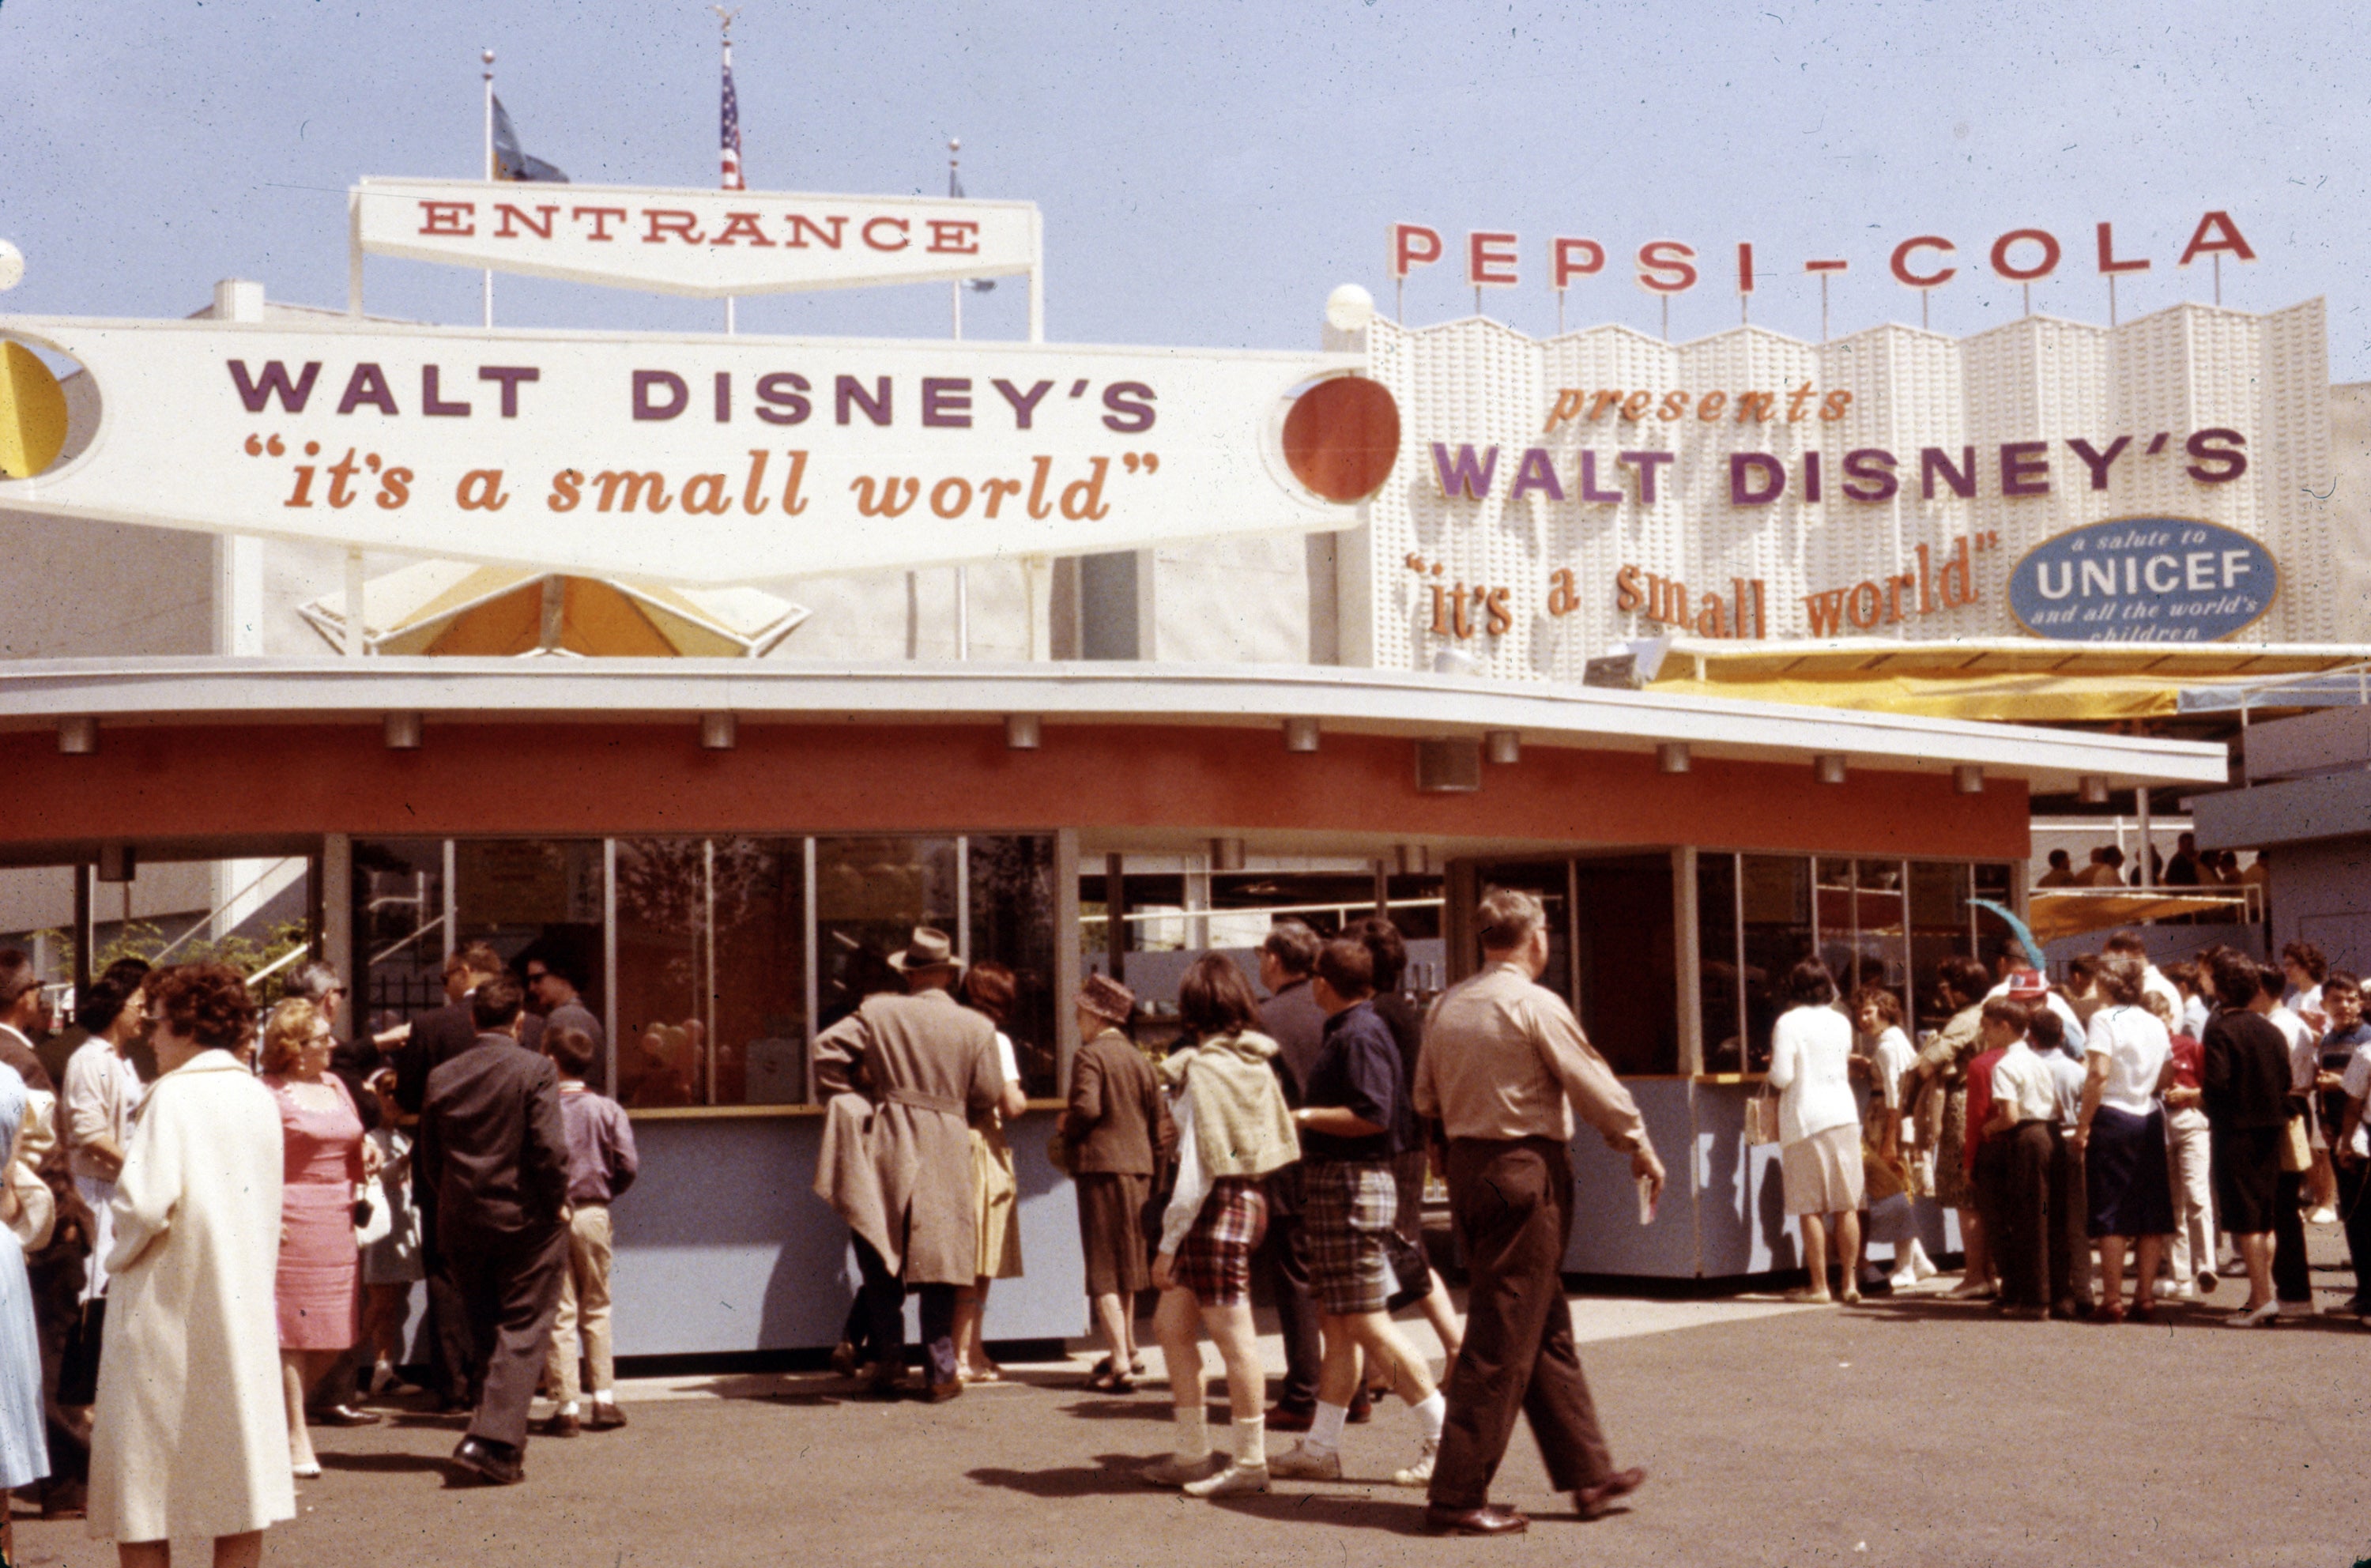 Drawing in the crowds: It's a Small World was a popular attraction at the World's Fair in 1964